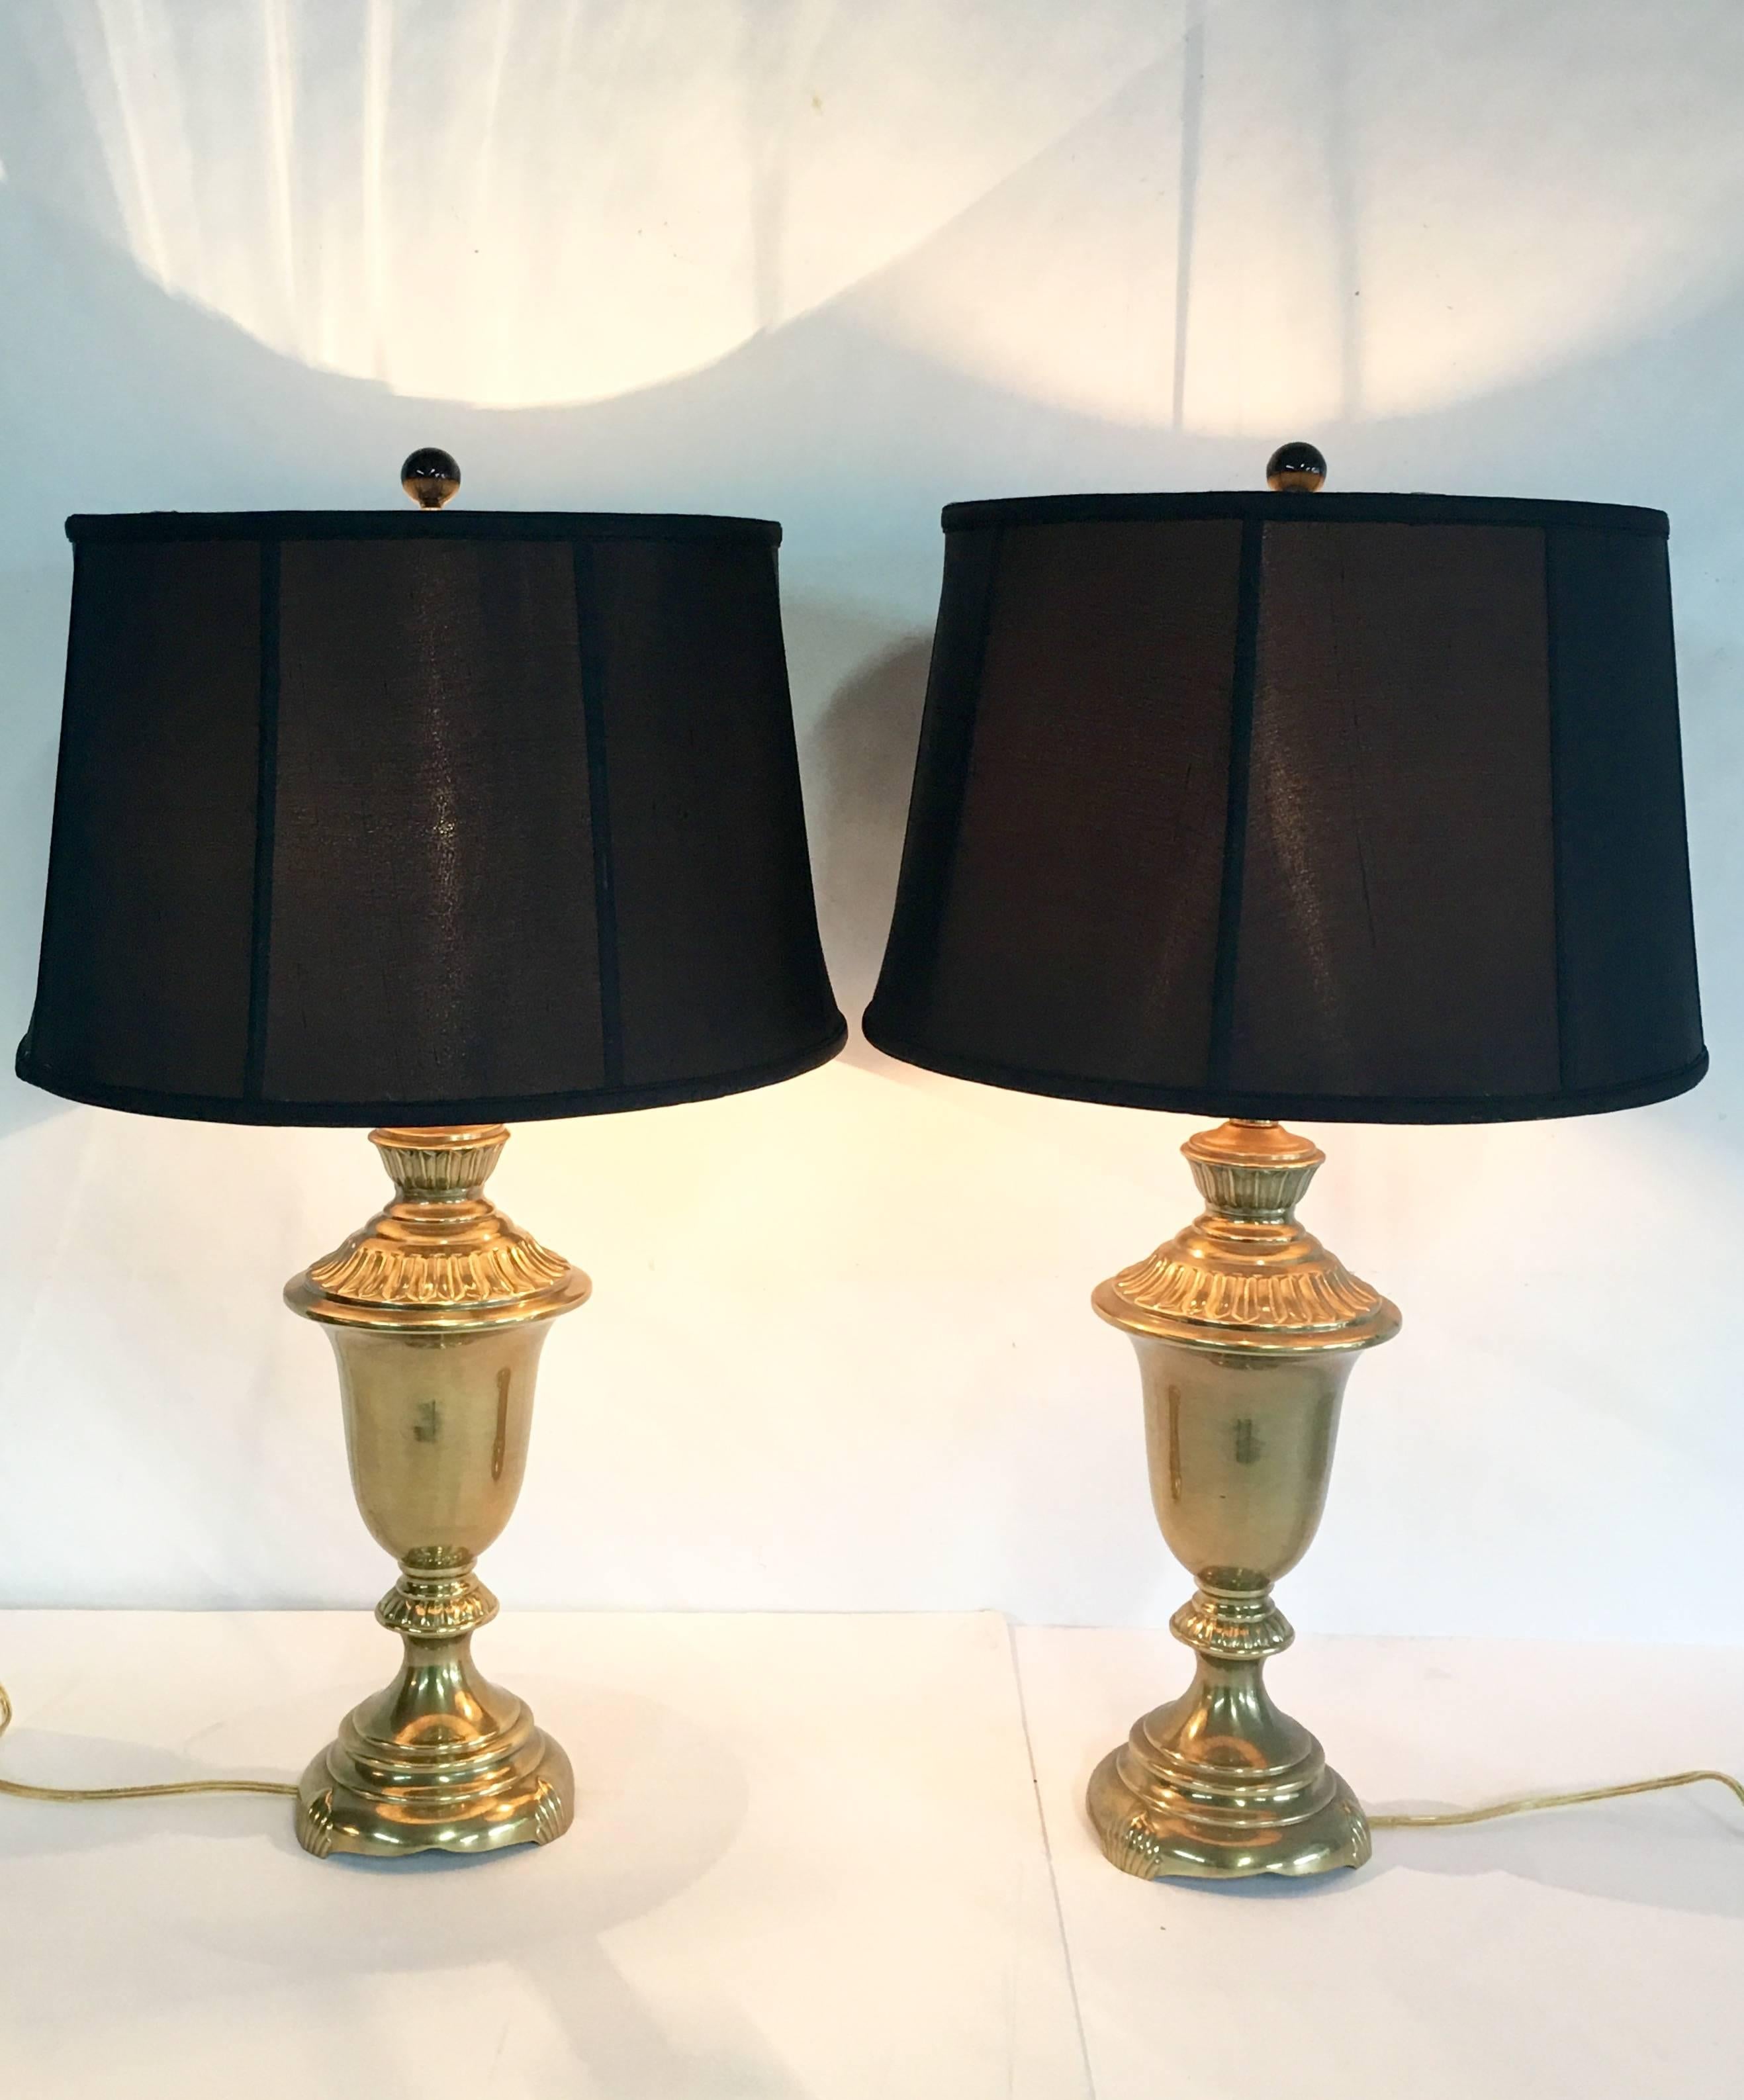 1960'S Classical  Pair Of Solid Brass Table Lamps. These 